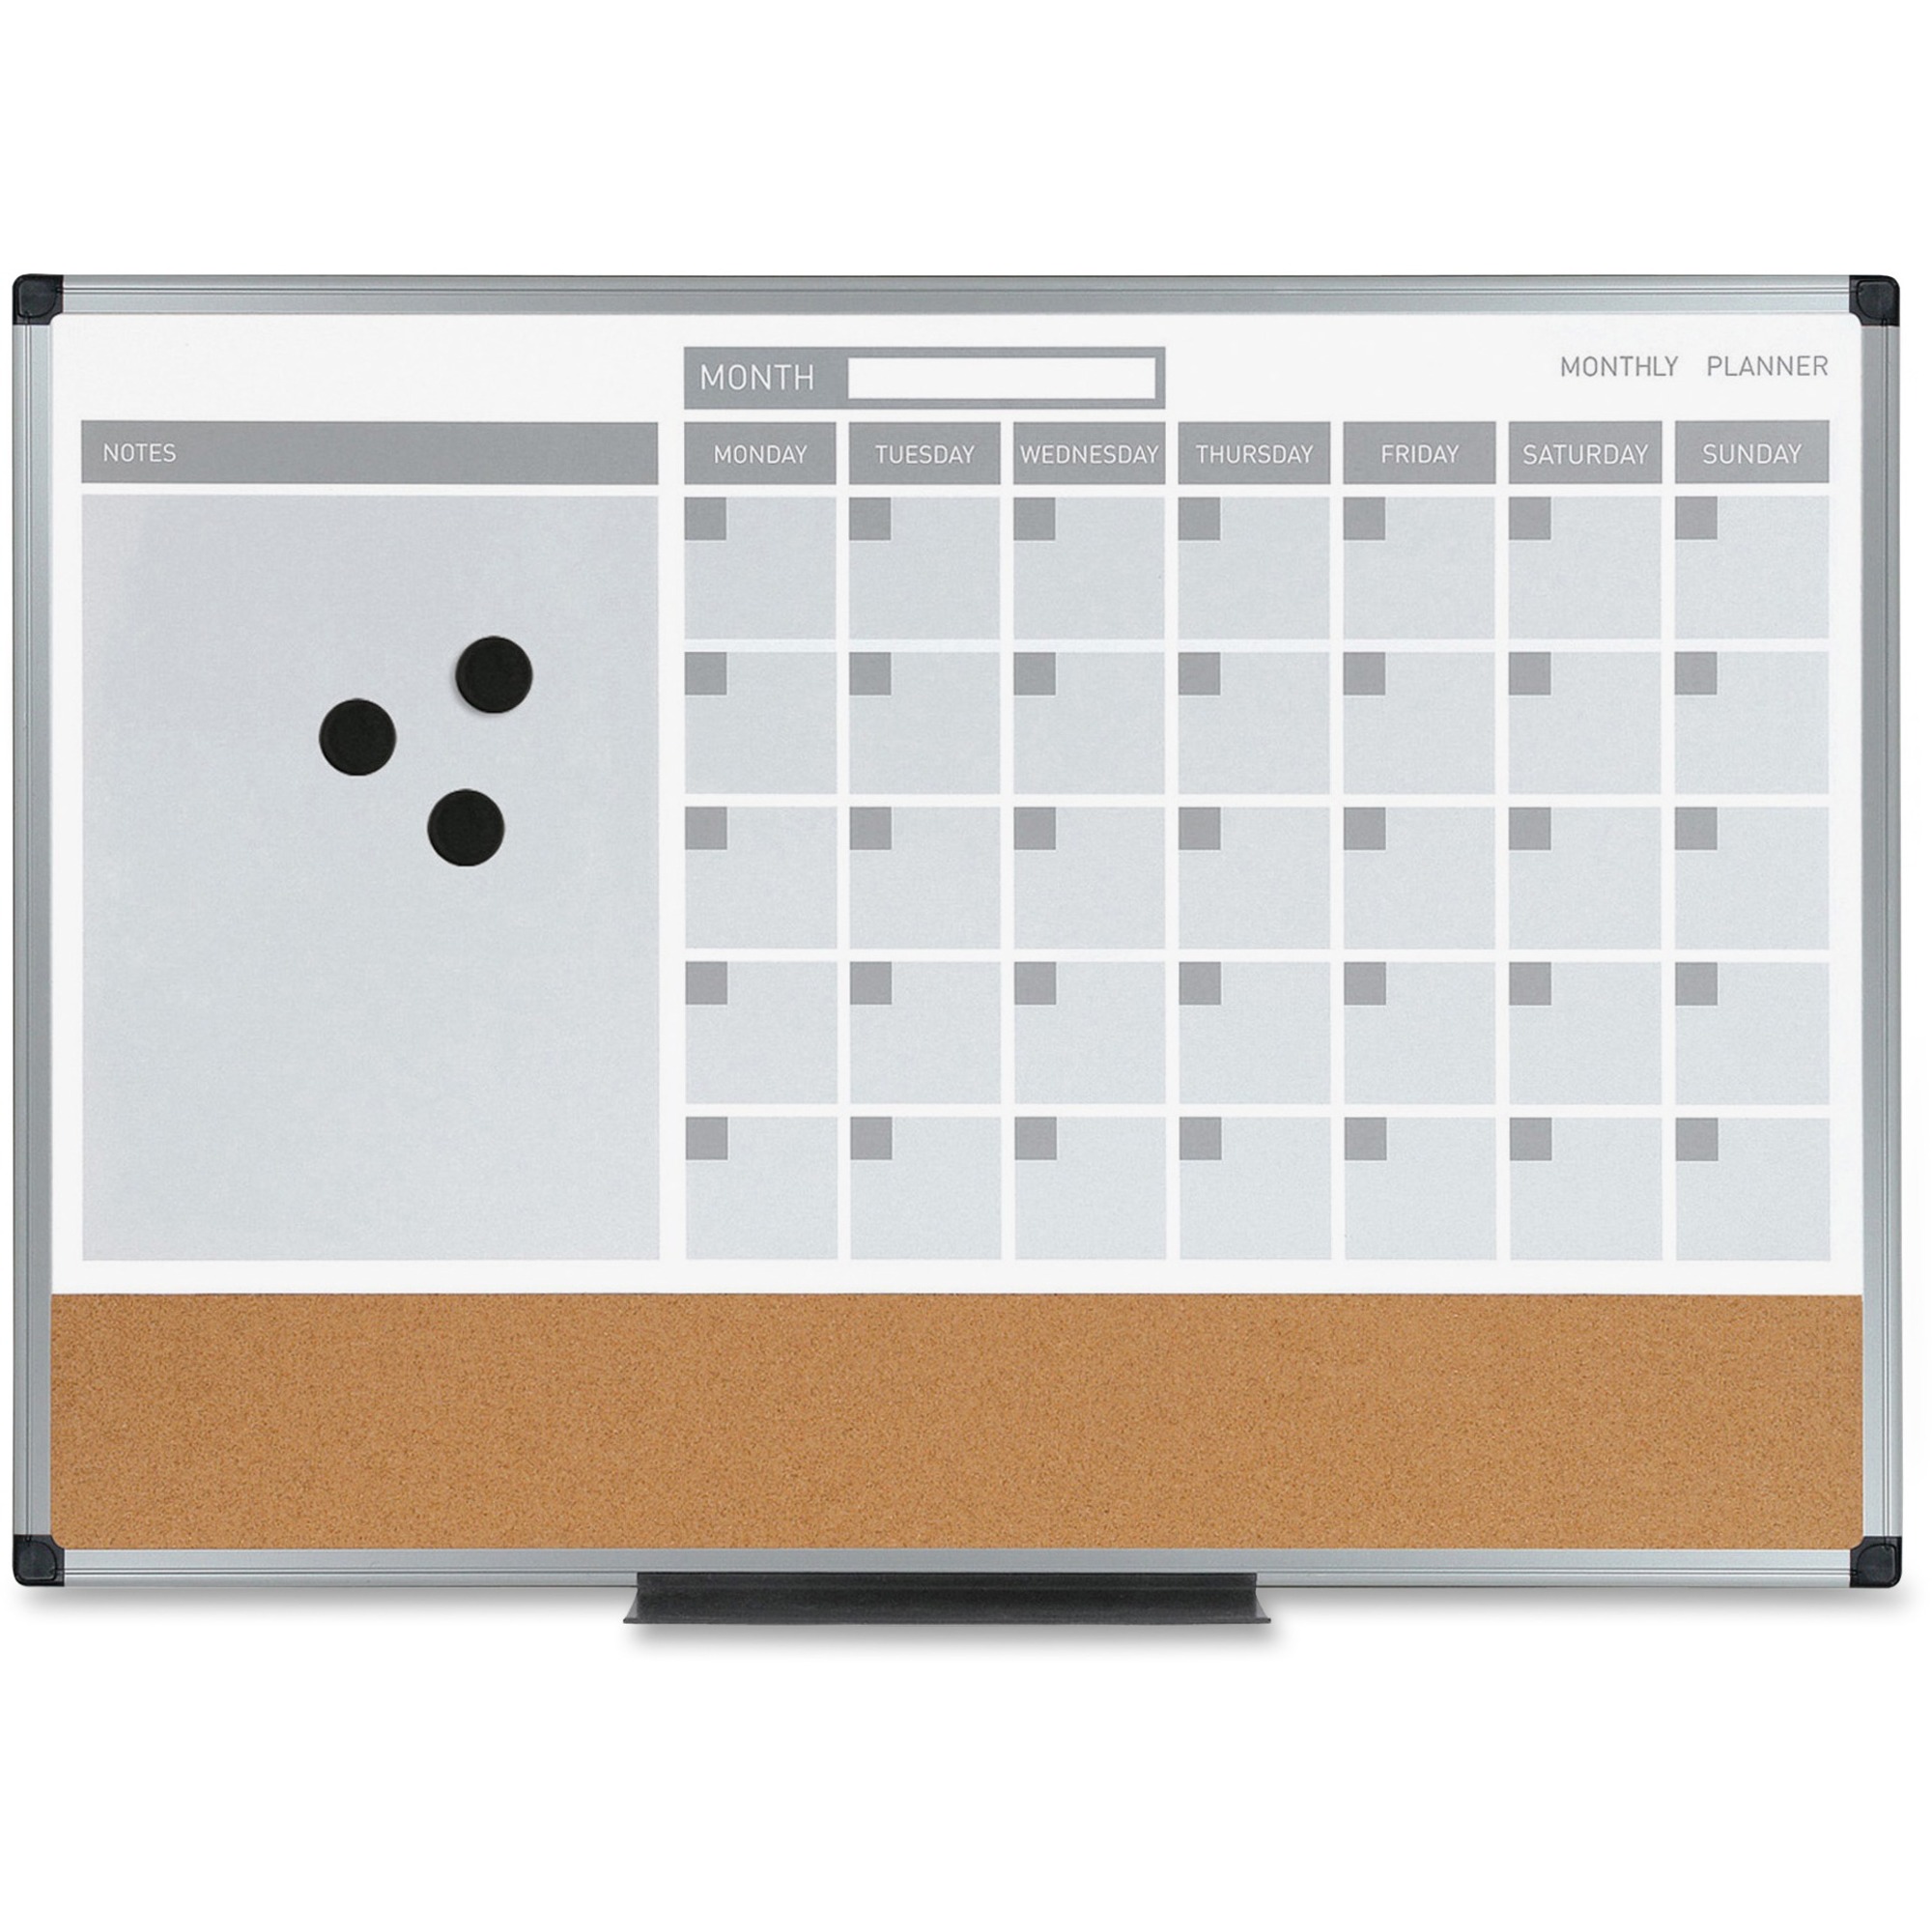 MasterVision 3in1 Combo Monthly Calendar Board Monthly 4 Month